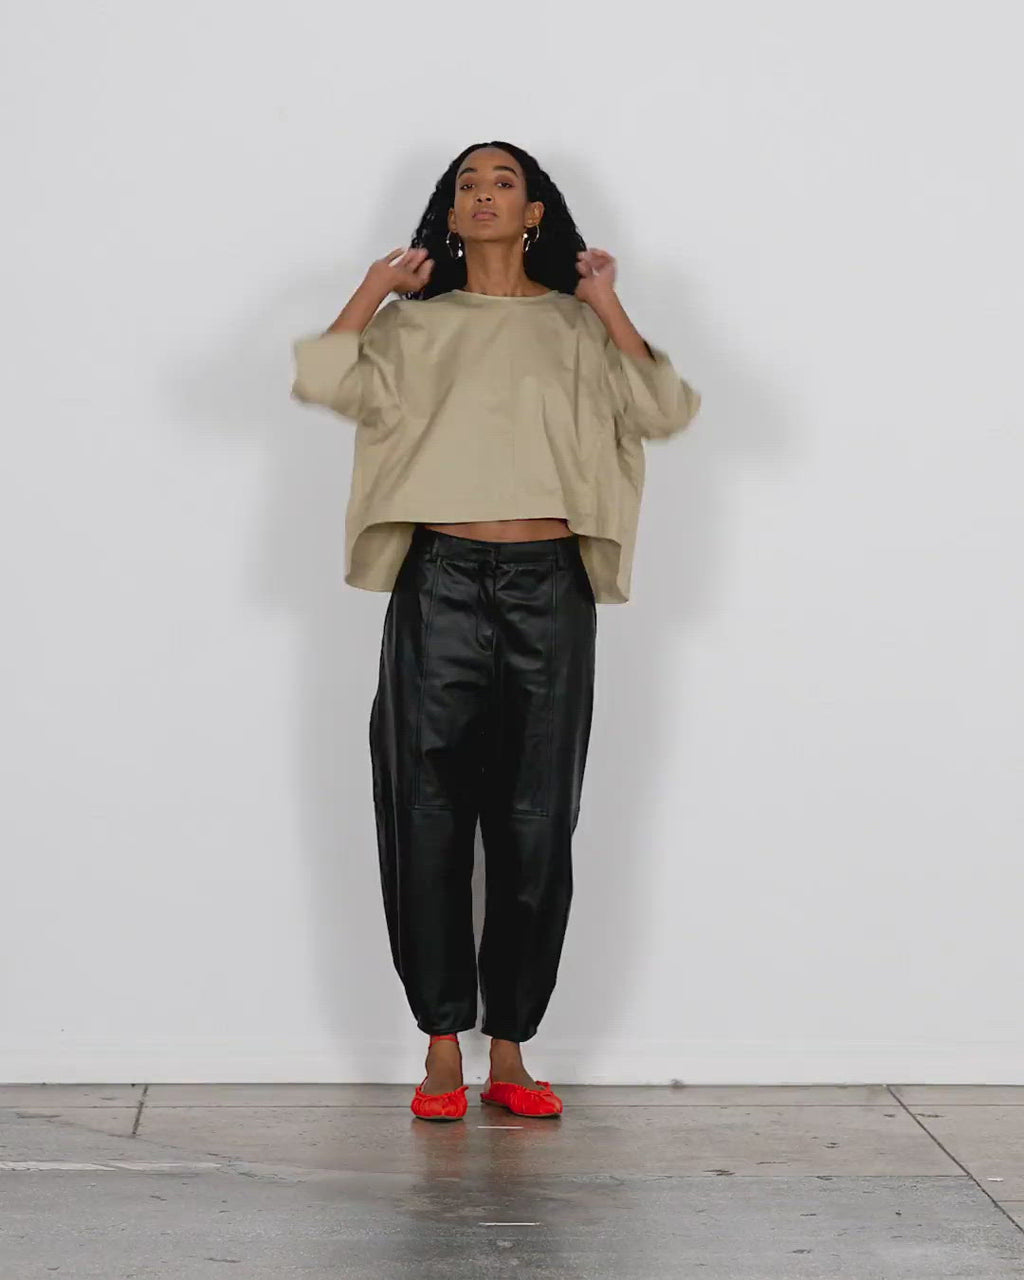 Model wearing the eco poplin sculpted top 1 walking forward and turning around